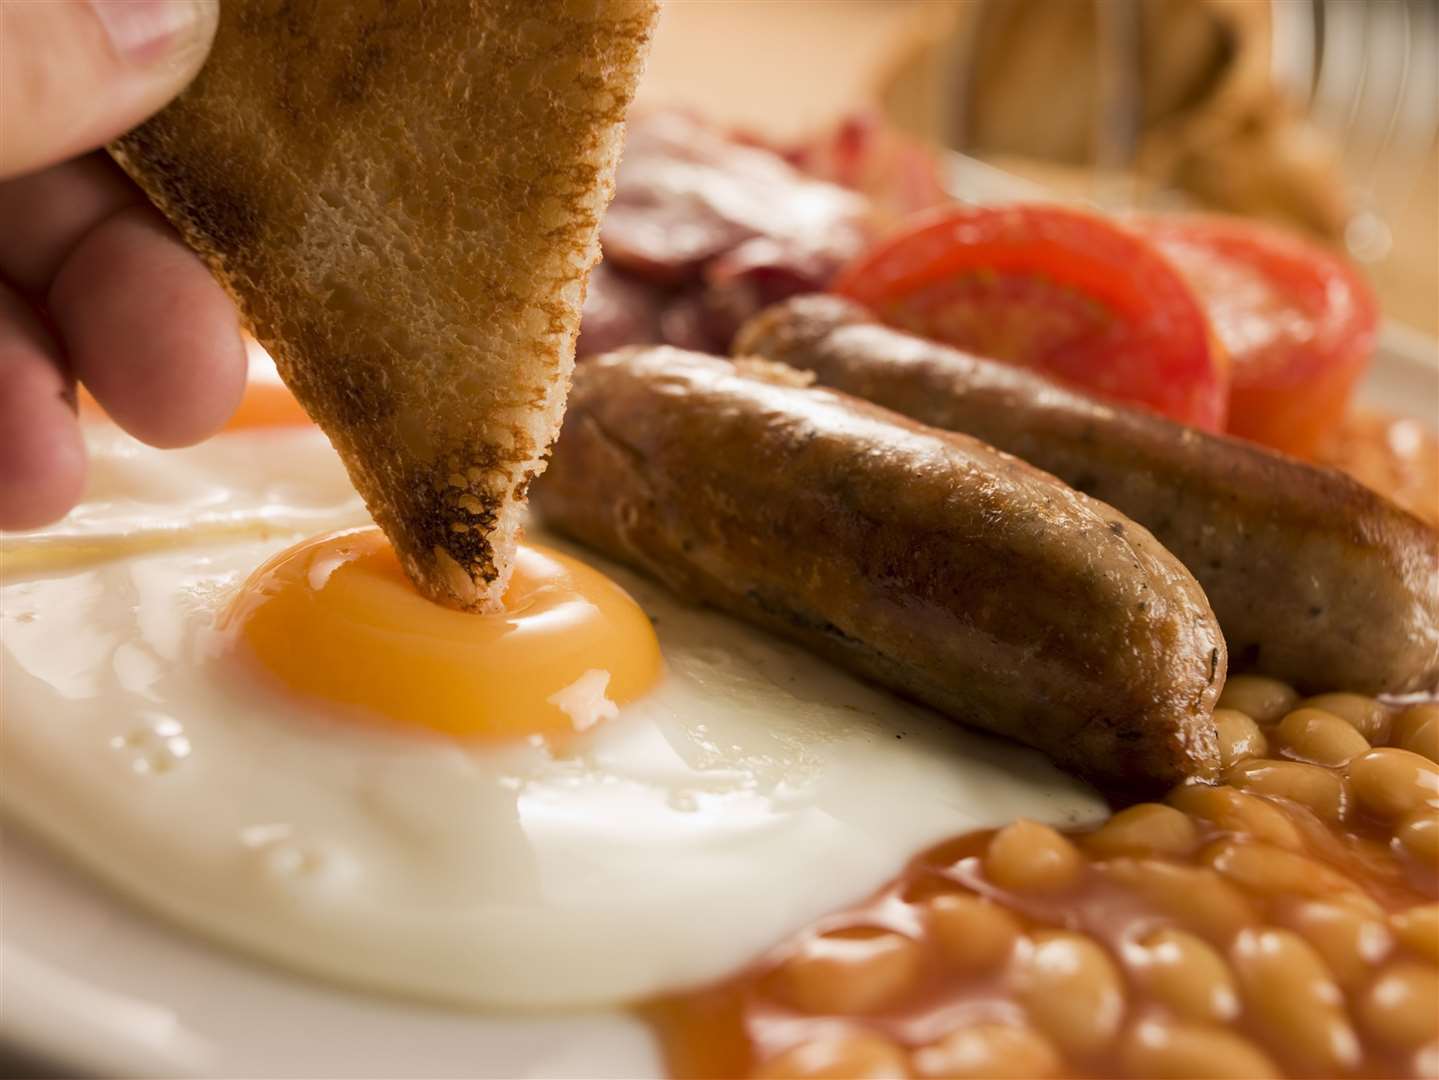 A hearty breakfast helps to replenish blood sugar Picture: Thinkstock Image Library